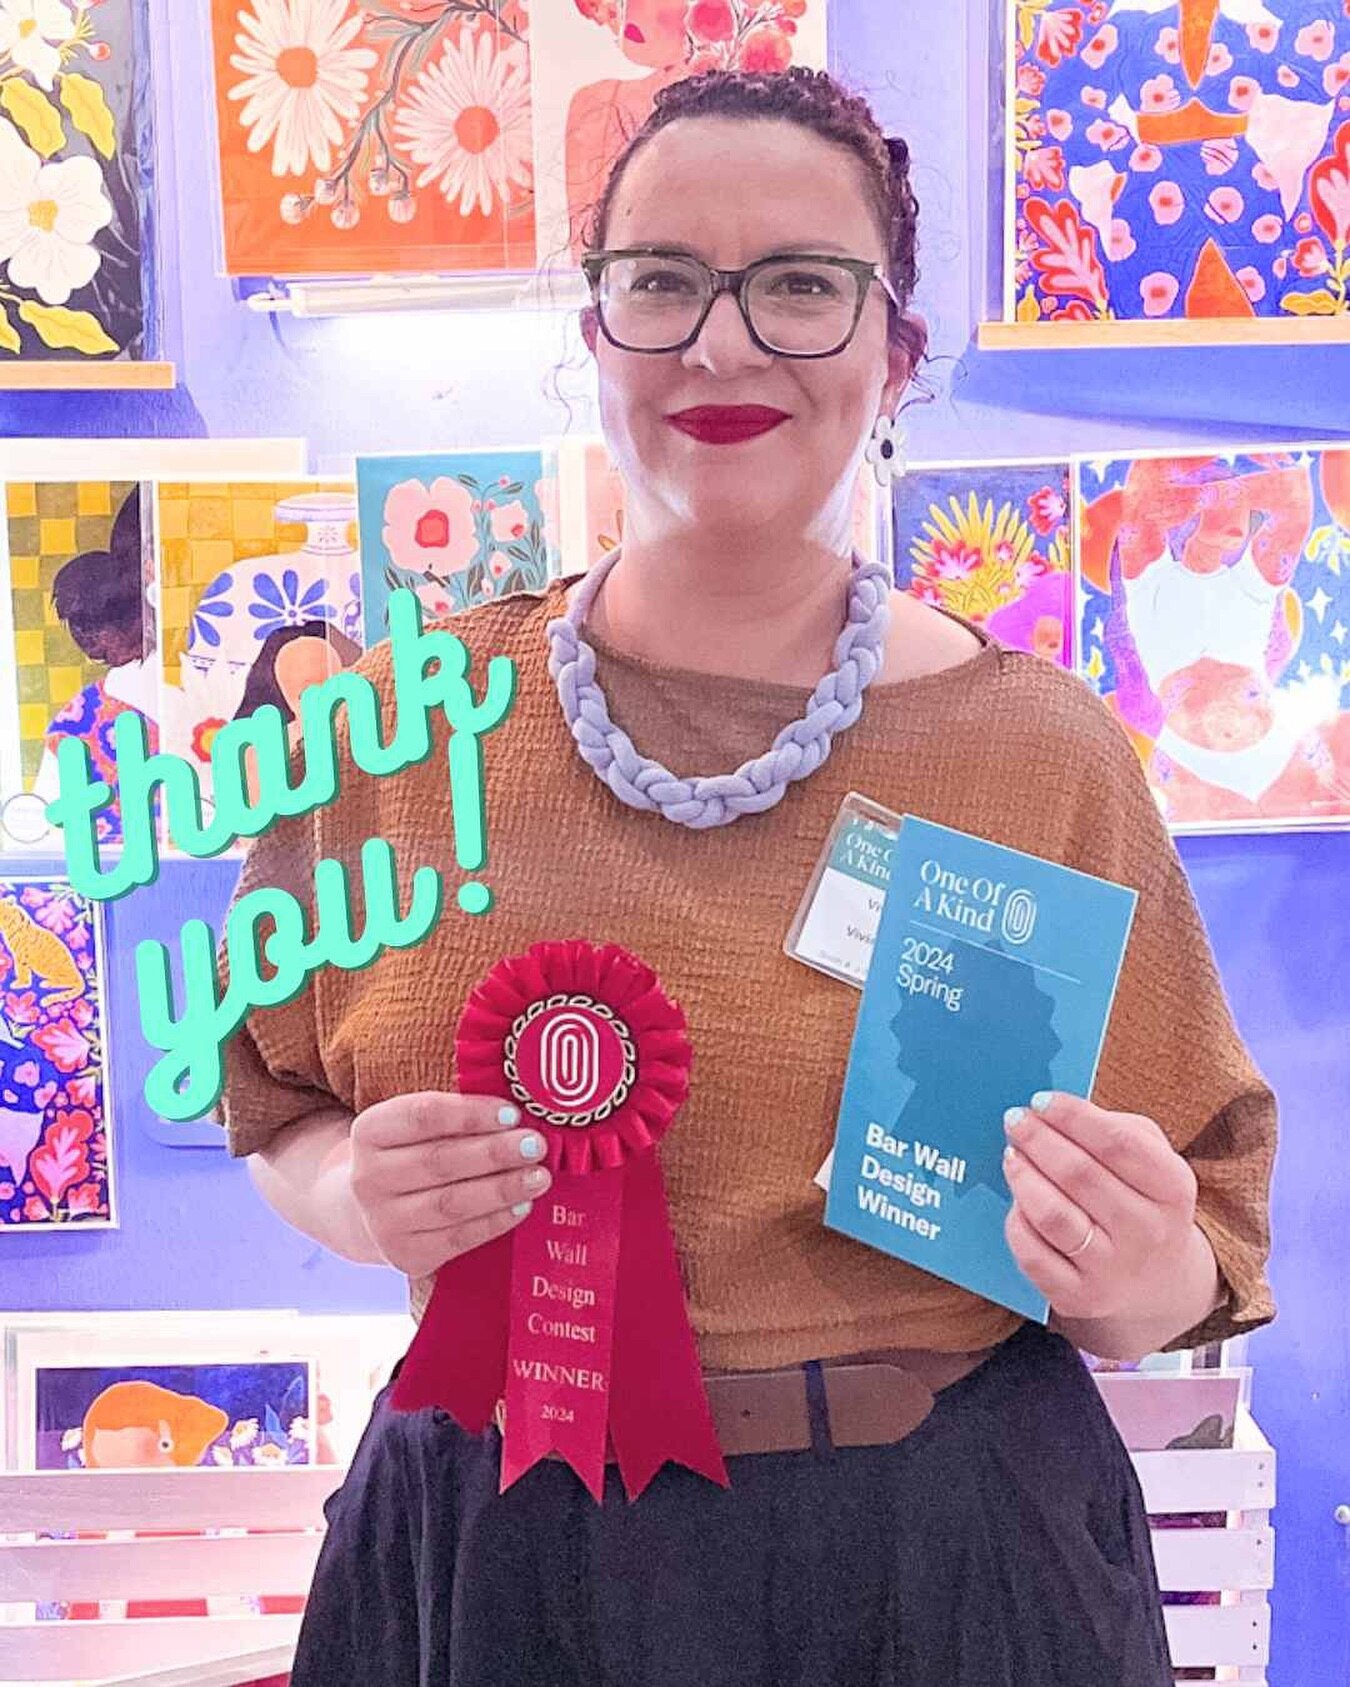 Thank you to the @ooak_toronto team for choosing my design. The ribbon made me feel so special! Come down and spend Sunday with us as a last chance to grab some goodies. See you today until 5pm! 

#ooakdiaries #ooakdiarieschallenge #muralsofinstagram